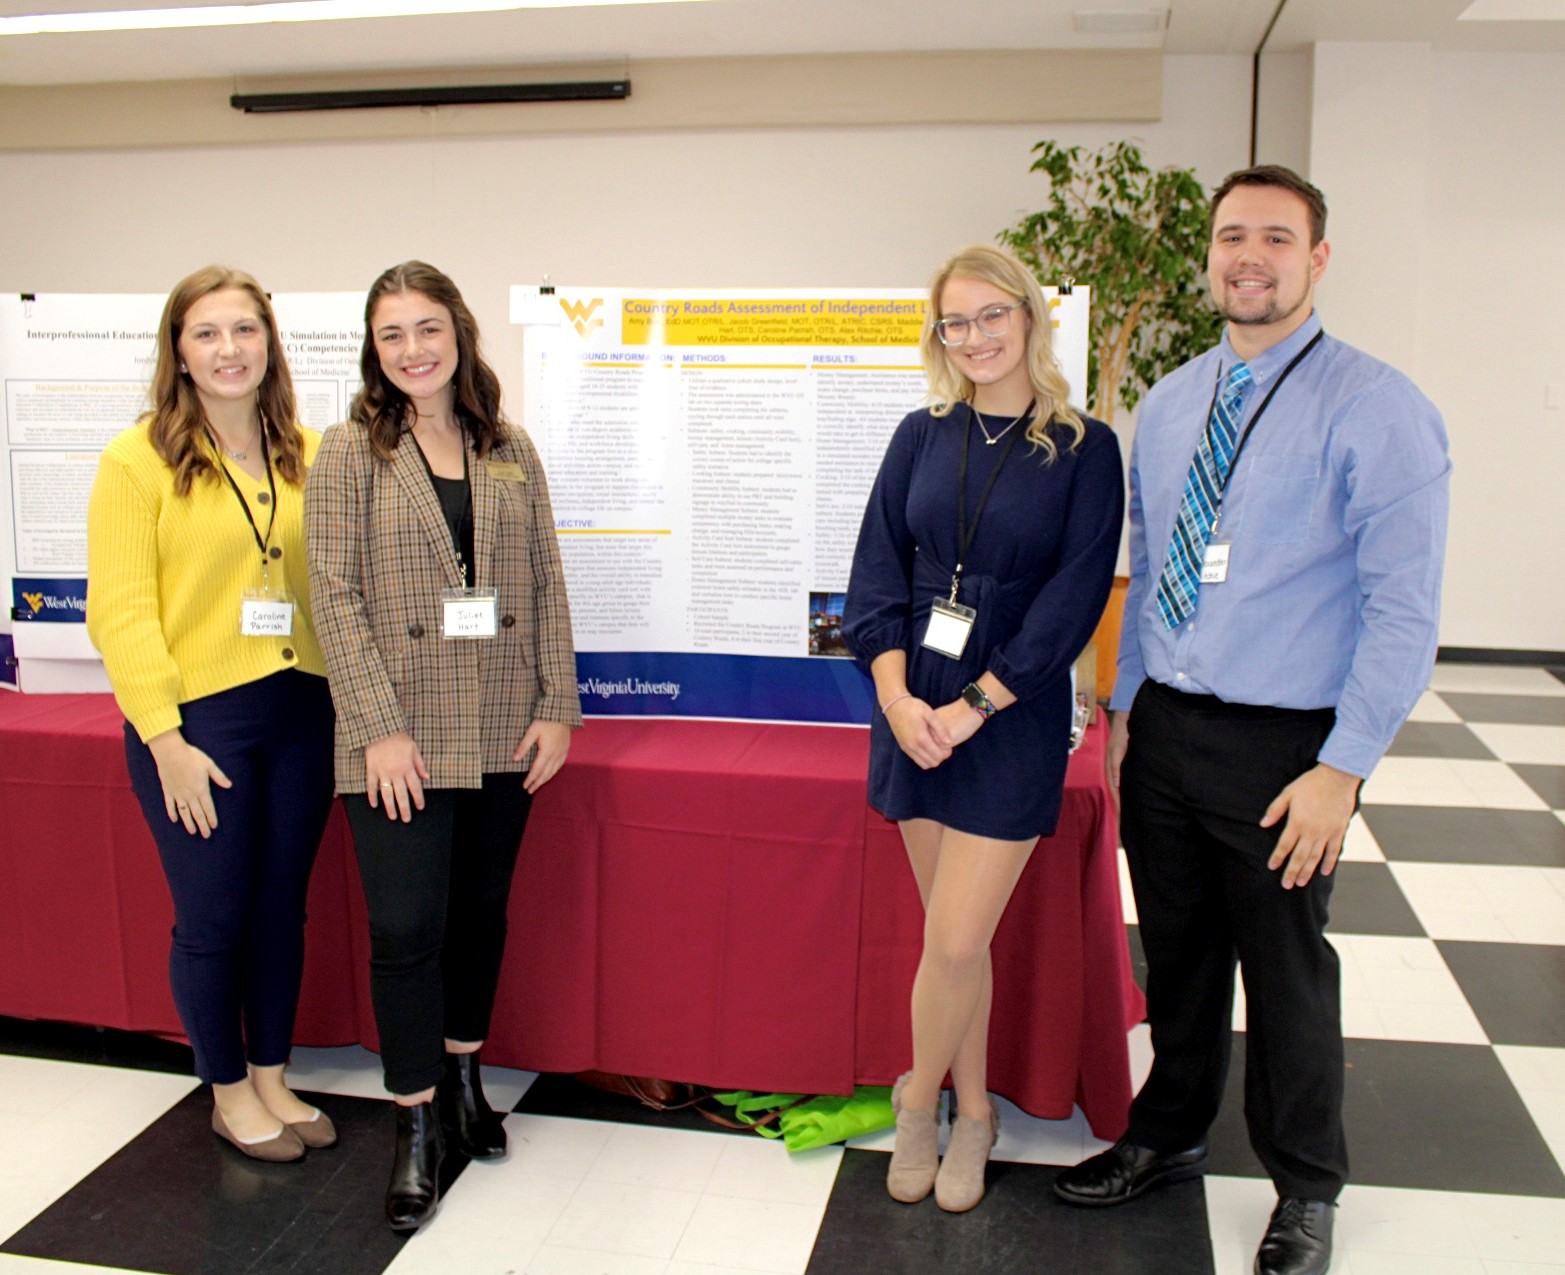 Students standing next to their poster